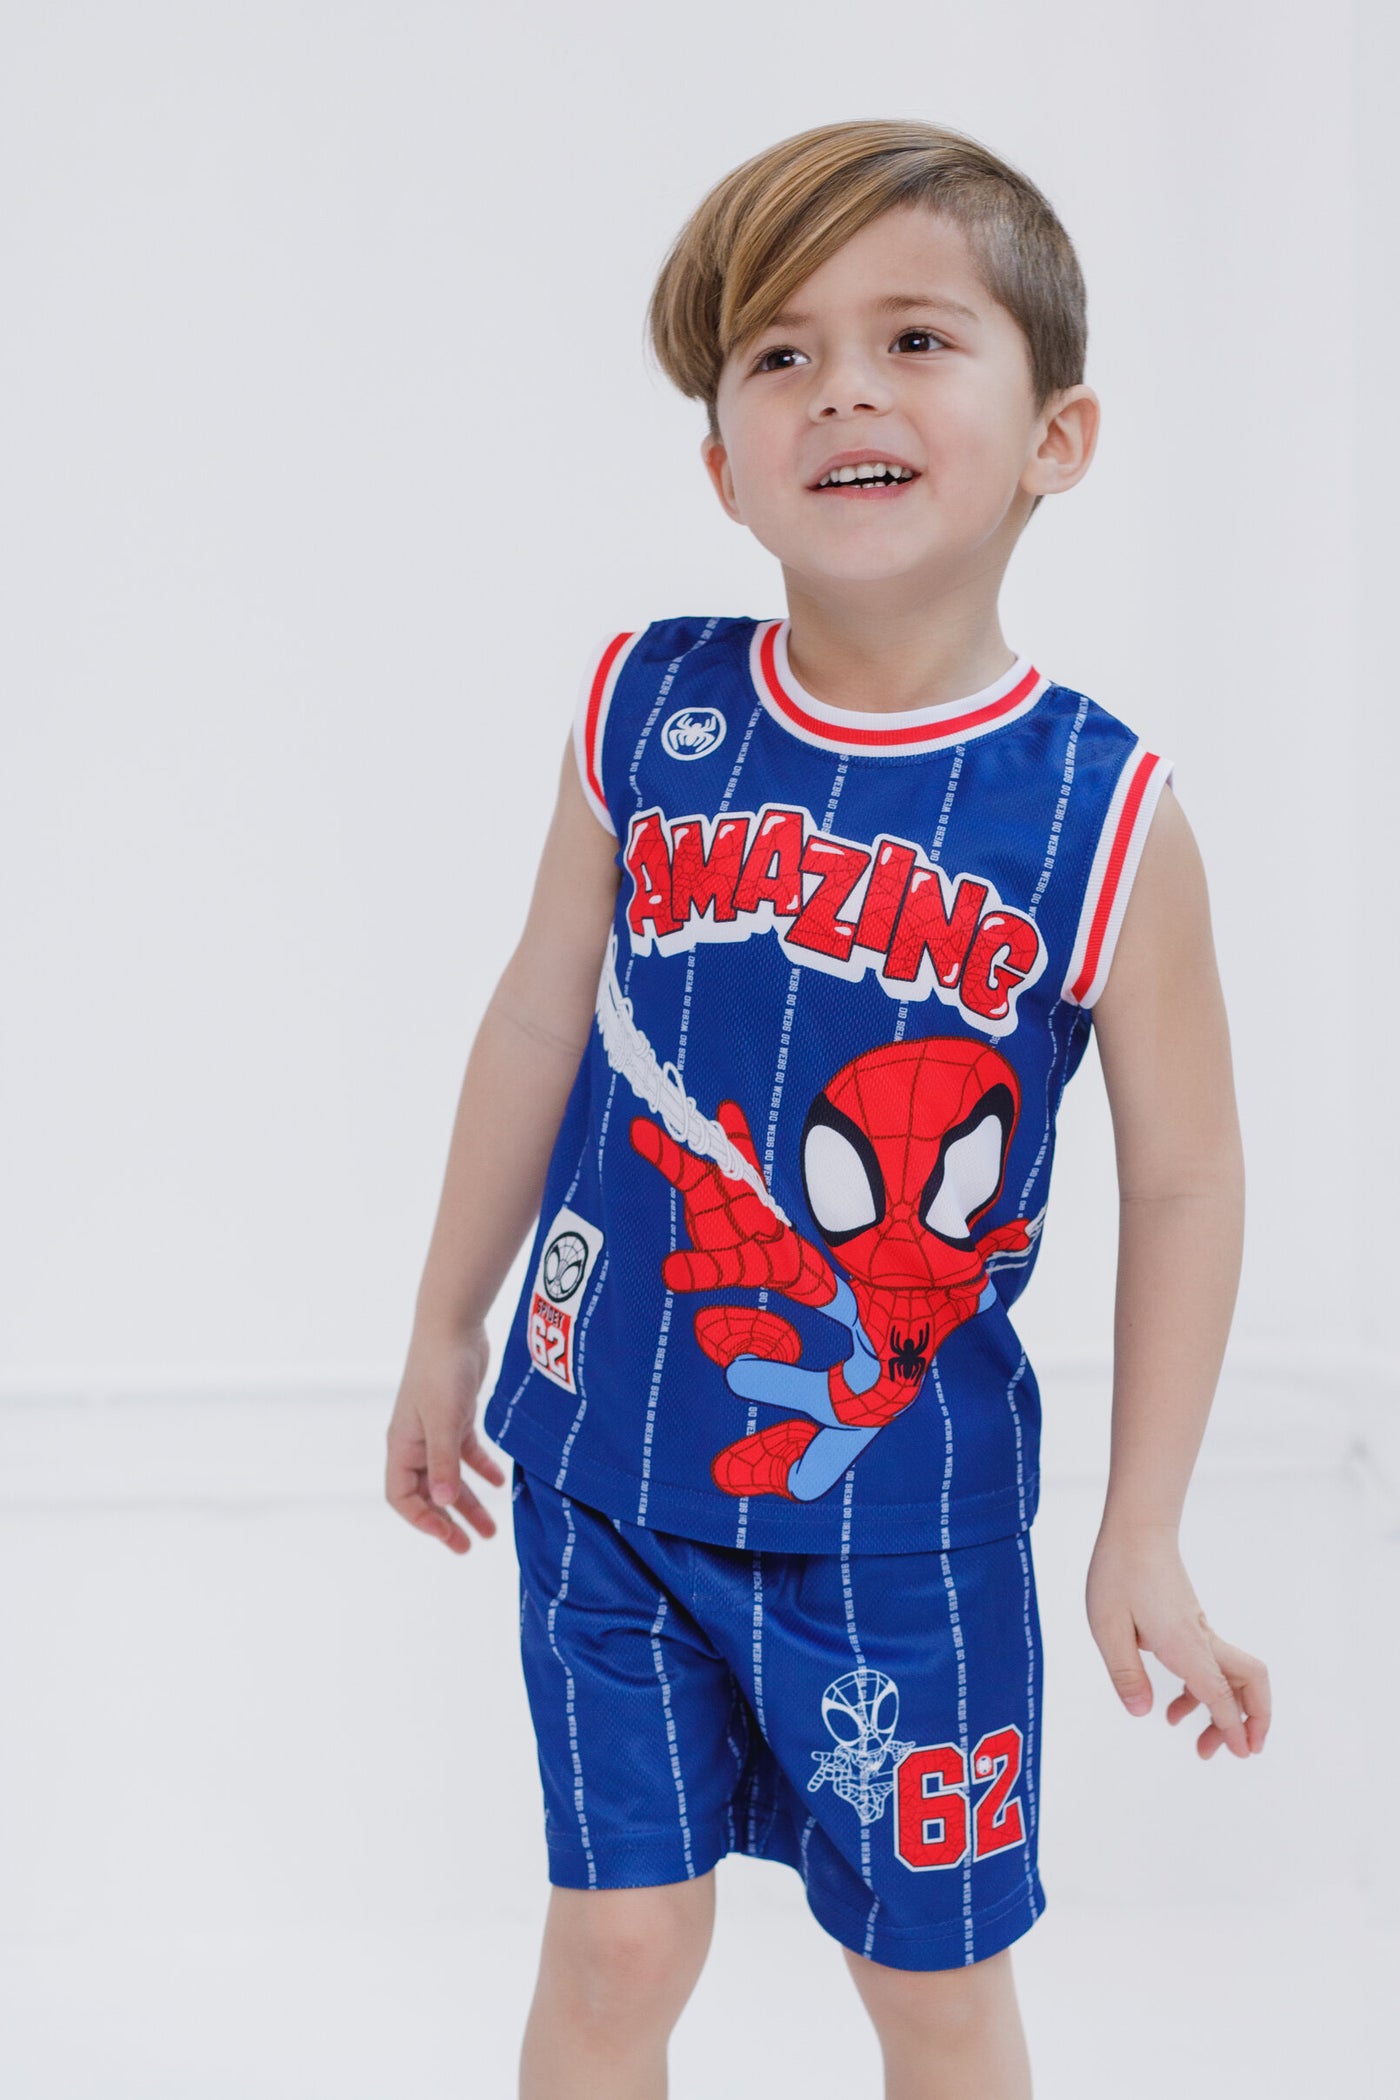 Marvel Spidey and His Amazing Friends Spider-Man Mesh Jersey Athletic Tank Top Basketball Shorts Outfit Set